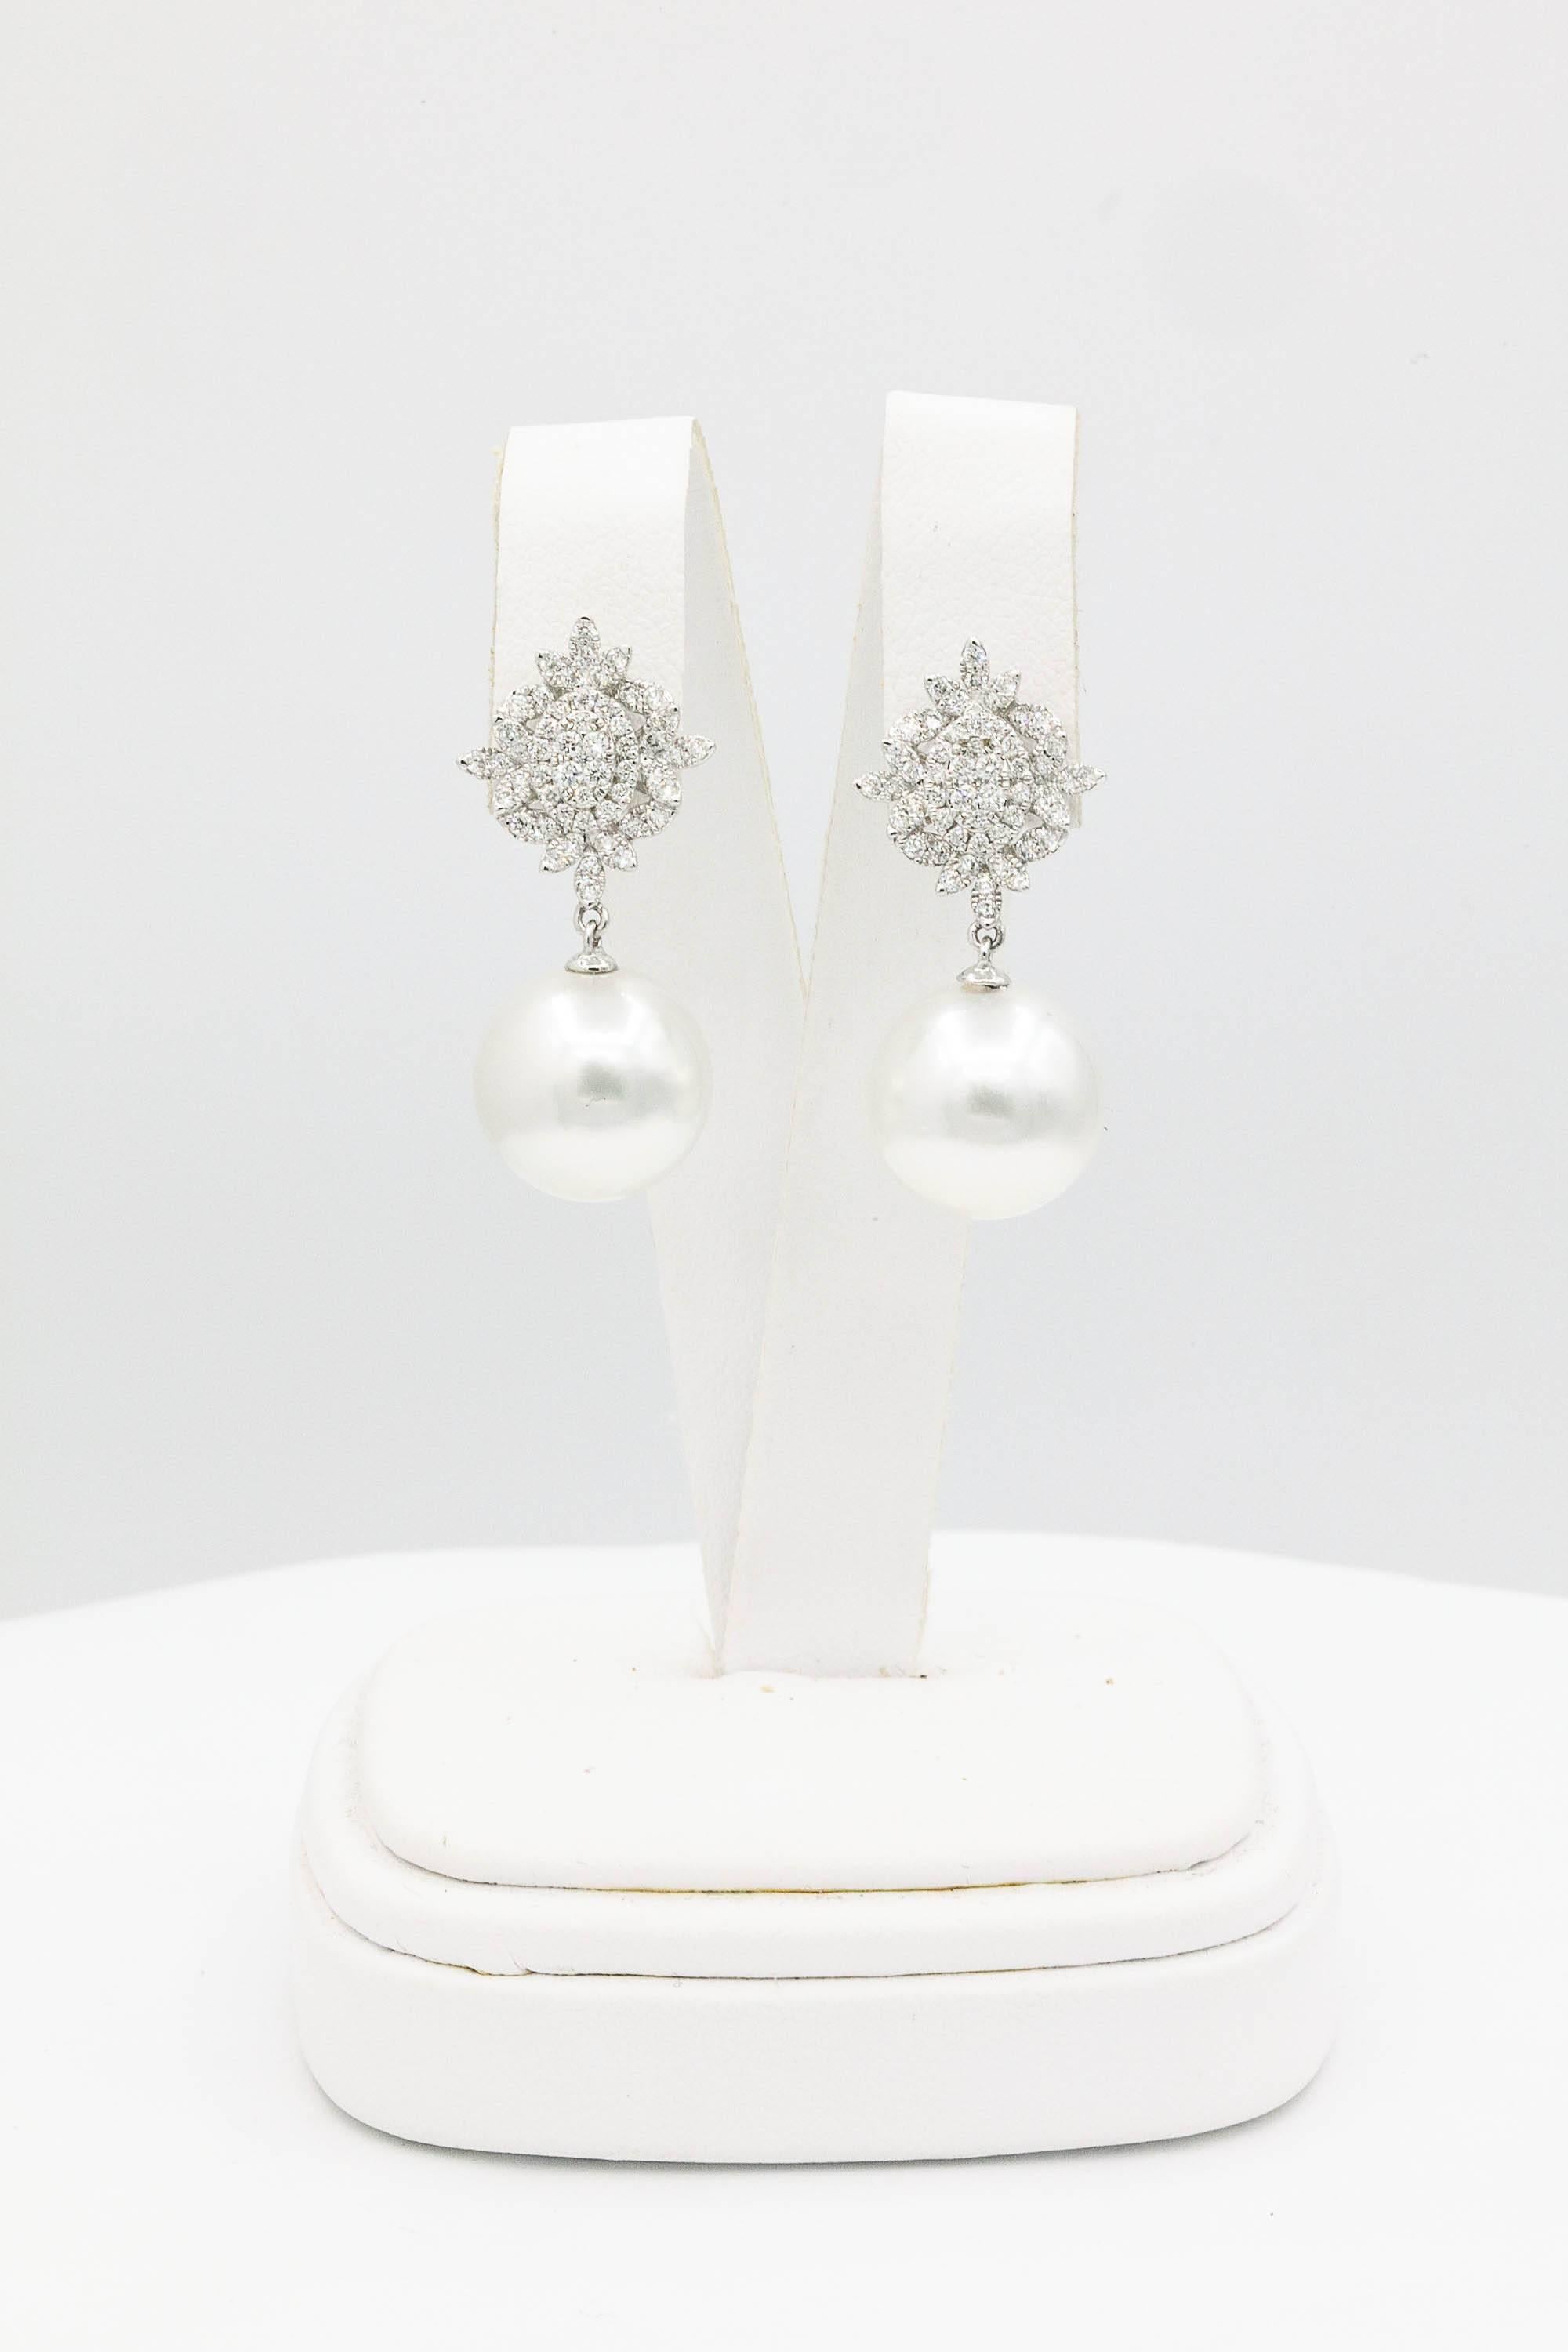 18K White Gold
South Sea Pearl 13-14 mm
Diamonds Round 0.80 Carats
Earrings measuring 1.25